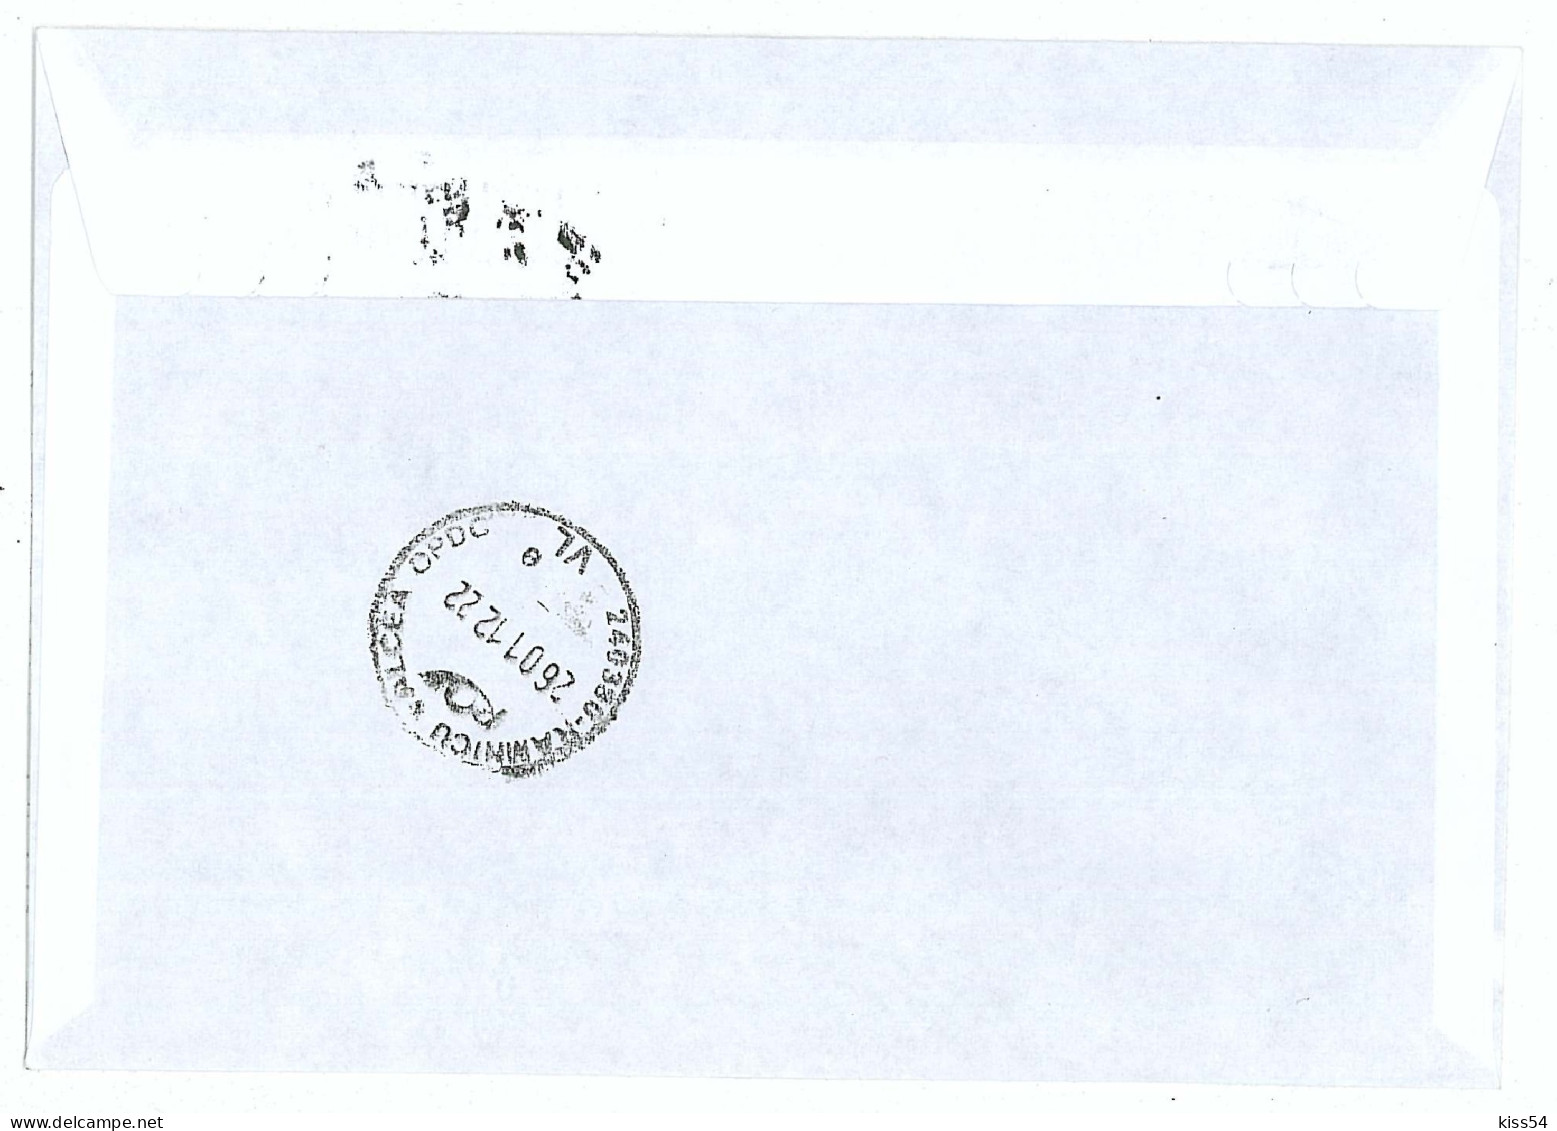 NCP 25 - 4212-a Flowers & COW,Romania - Registered, Stamp With Vignette - 2012 - Covers & Documents